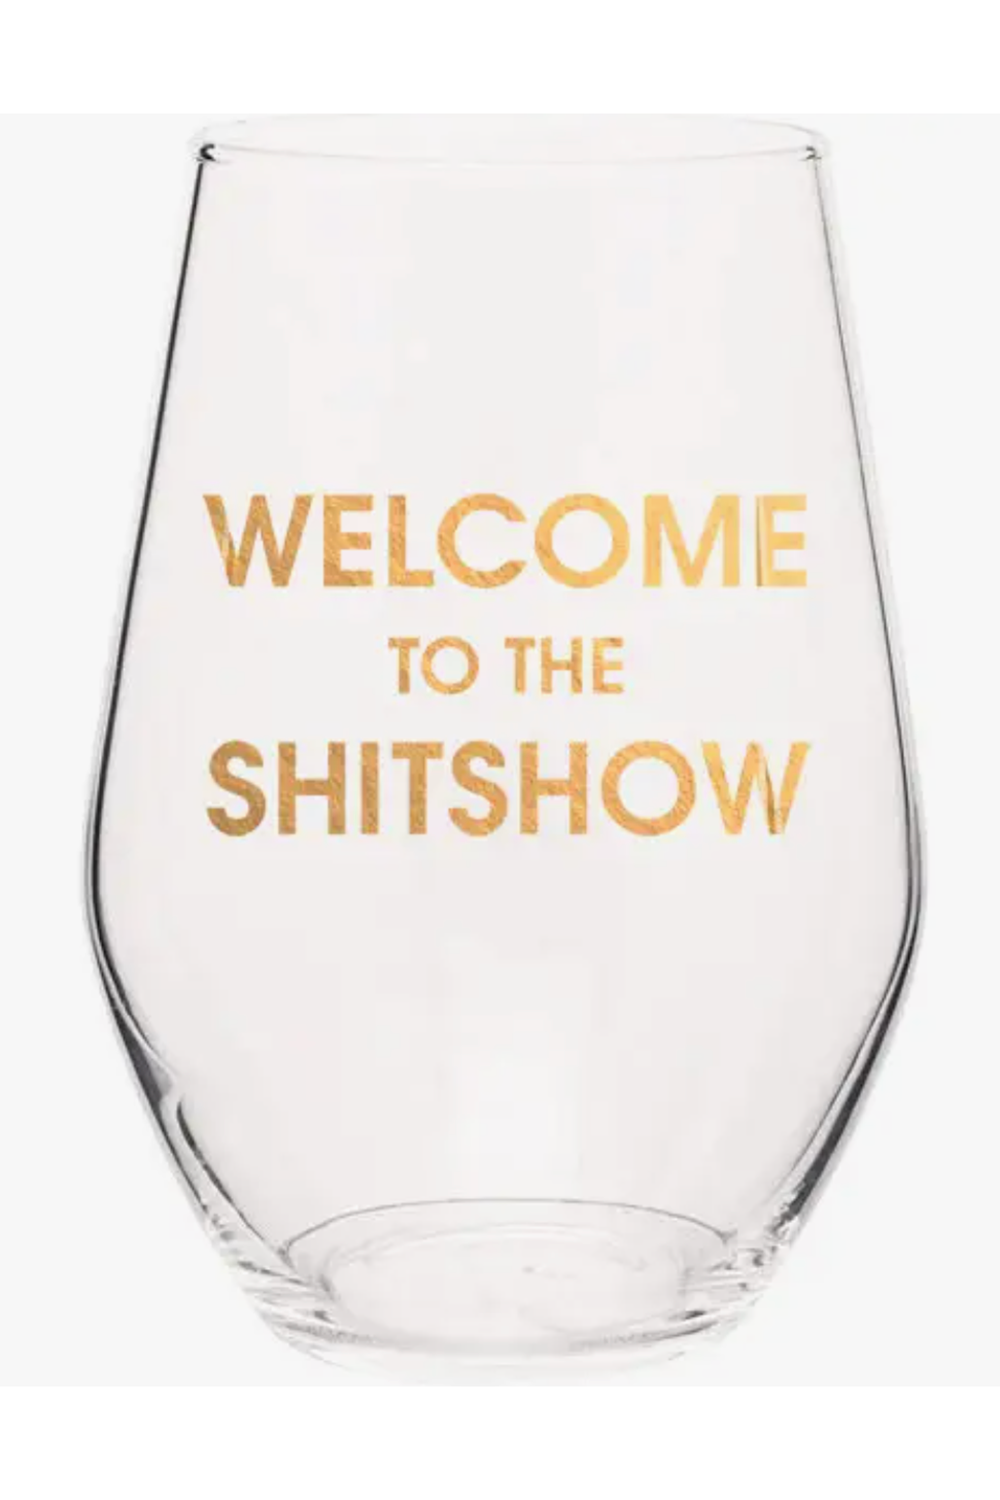 Gold Foil Wine Glass - Welcome to the Shitshow